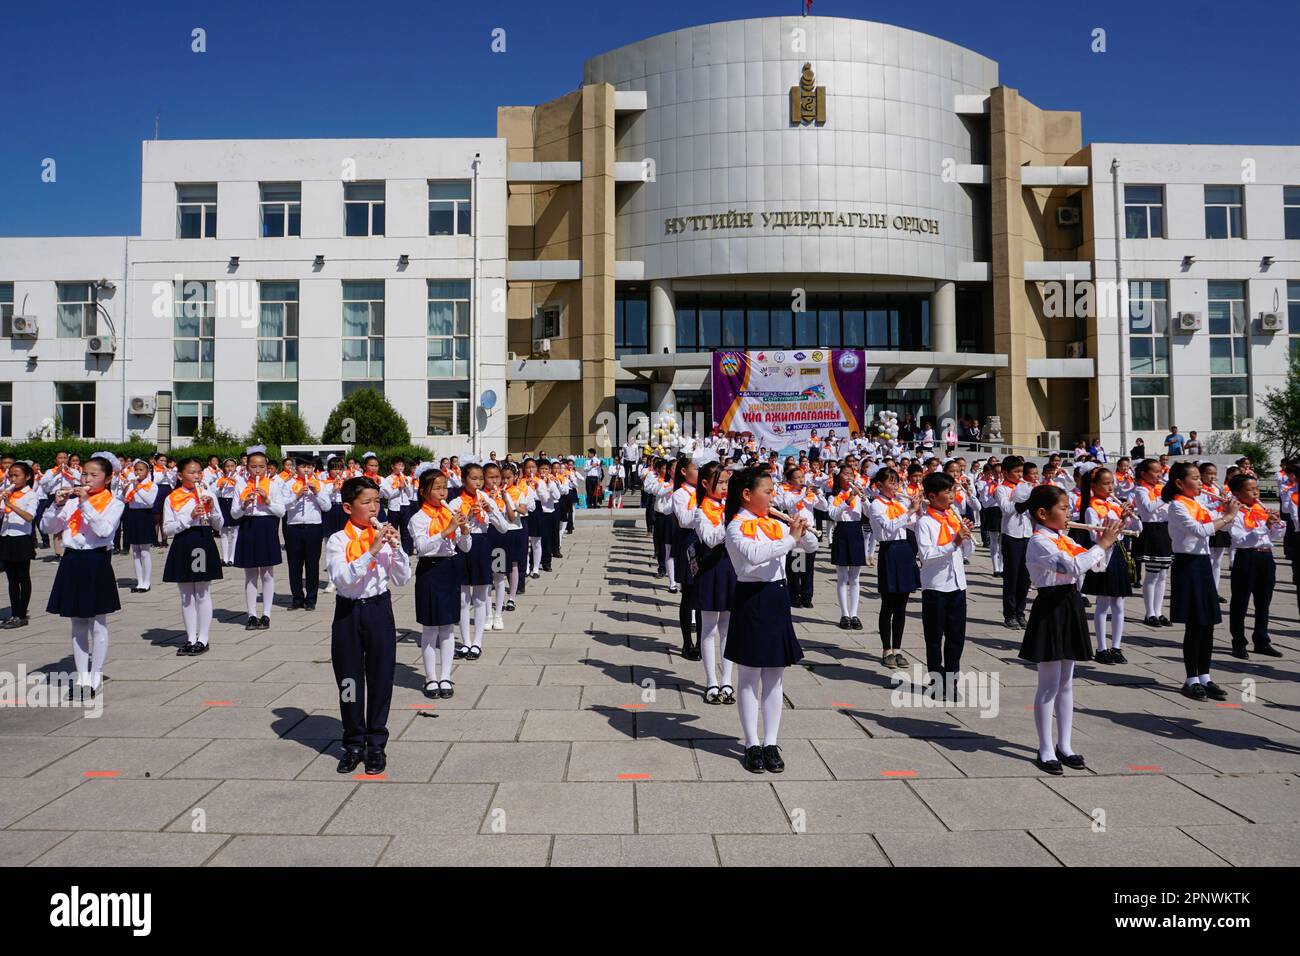 Students representing grades one to 12 from seven schools play recorders at the closing of an extracurricular event in front of a government building in Dalanzadgad, Umnugovi province, Mongolia on May 21, 2022. (Uranchimeg Tsoghuu/Global Press Journal) Stock Photo